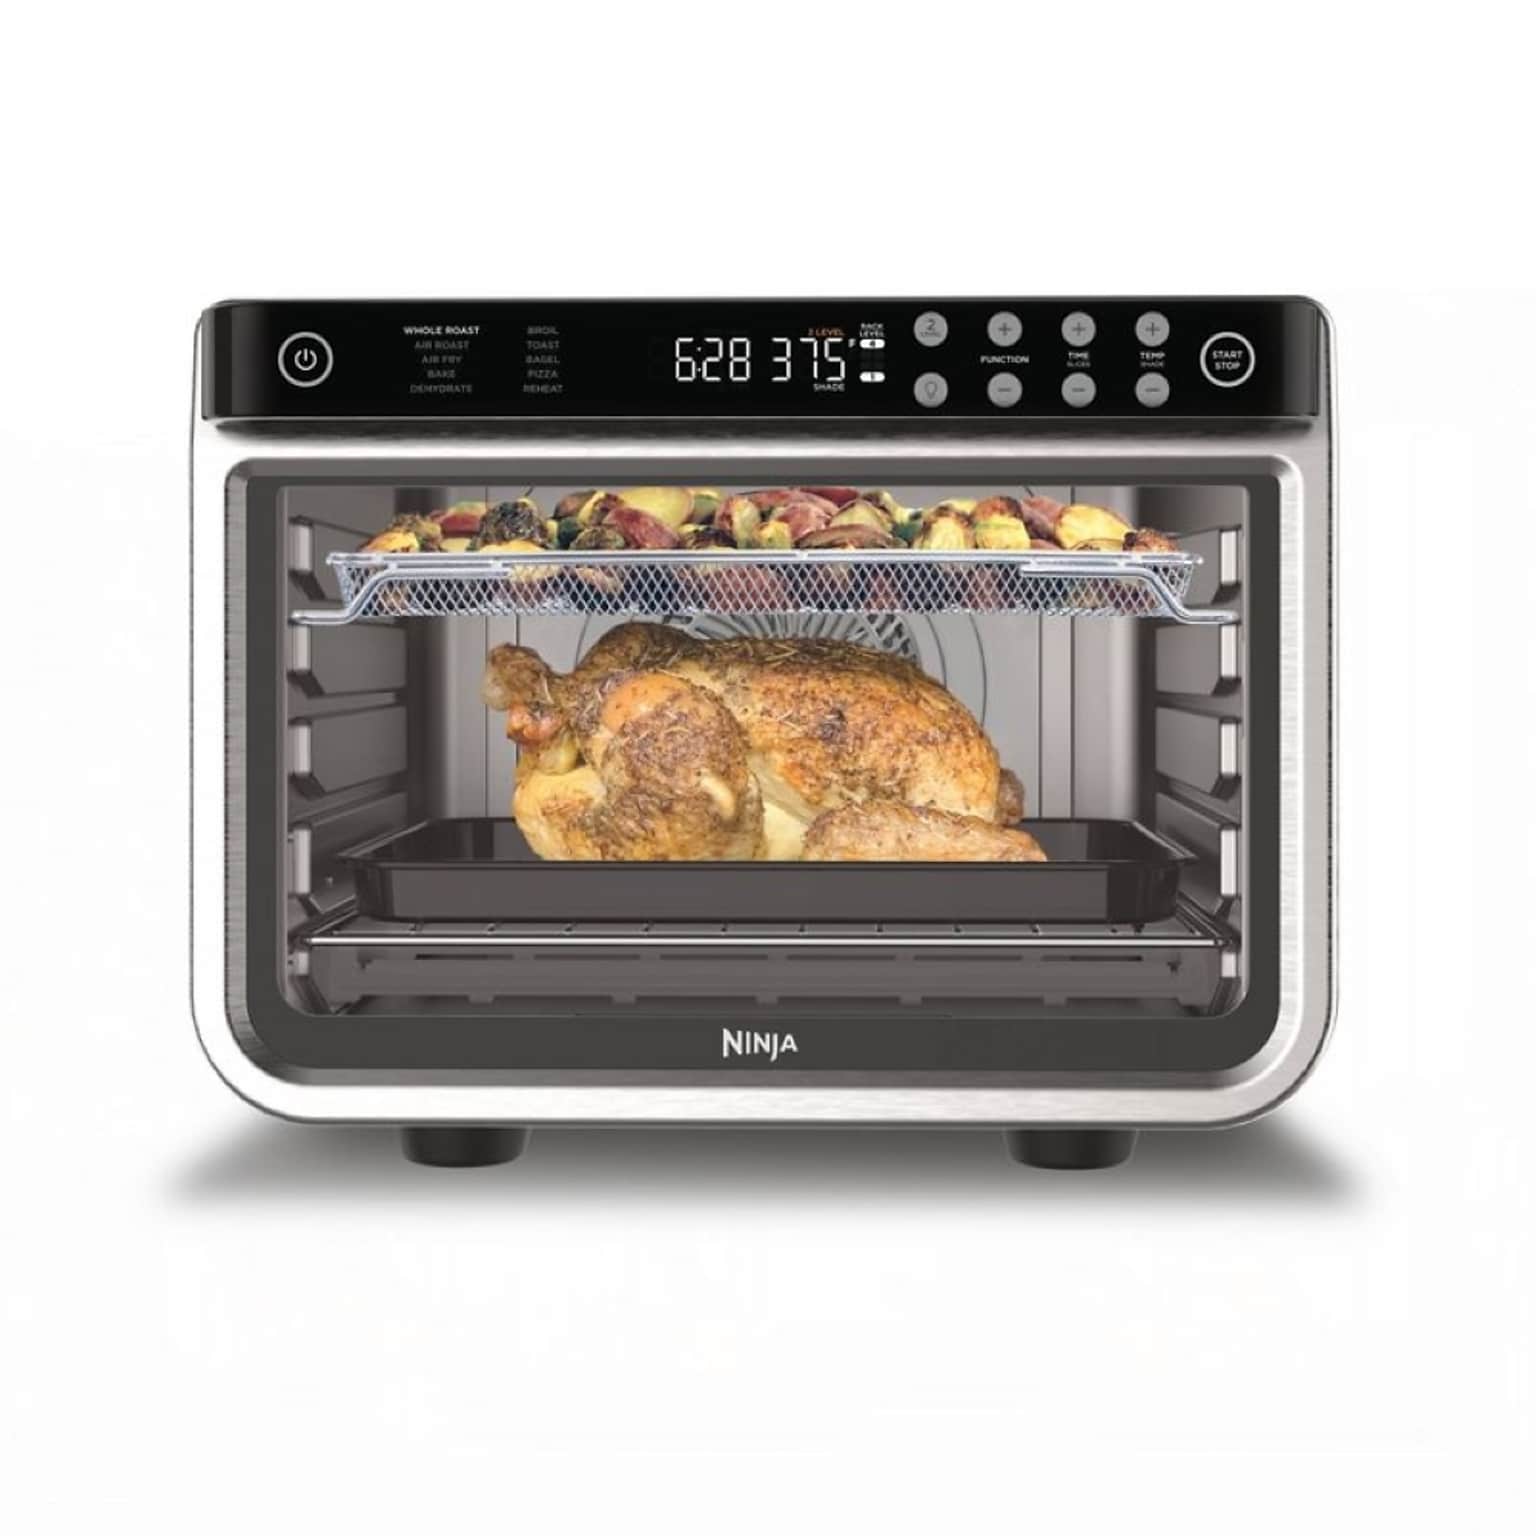 Ninja Foodi 10-in-1 XL Pro 8-qt Air Fry Oven, Stainless Steel (DT201)